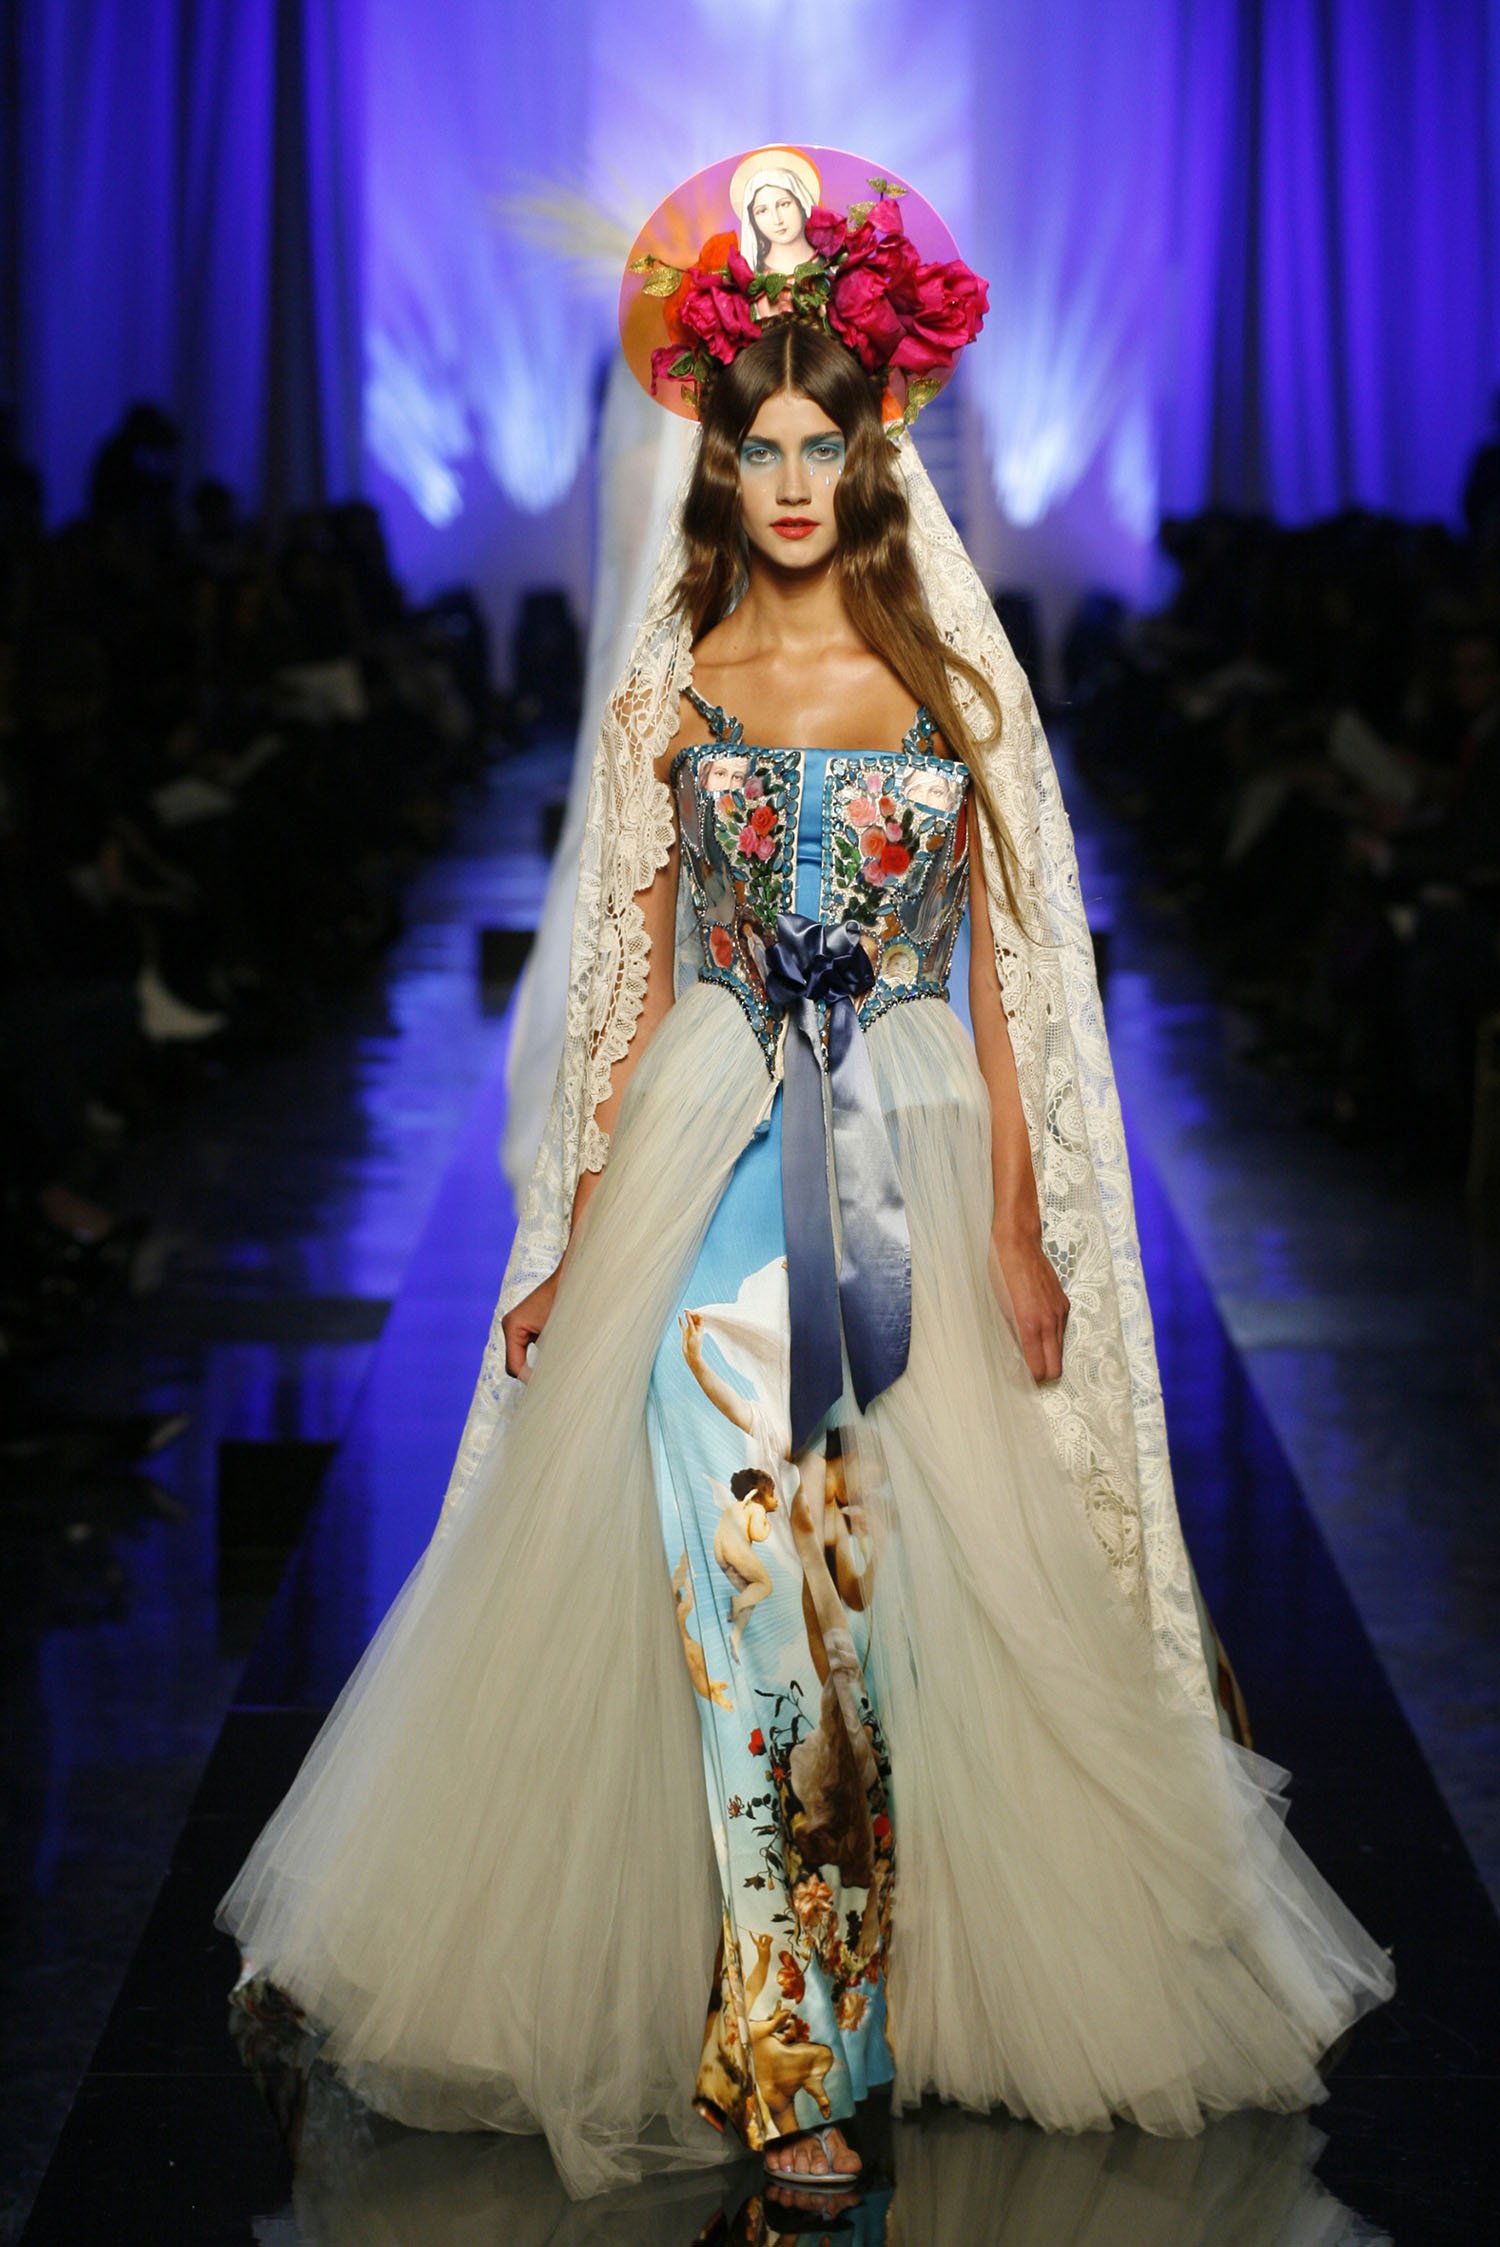 The Fashion World of Jean Gaultier -